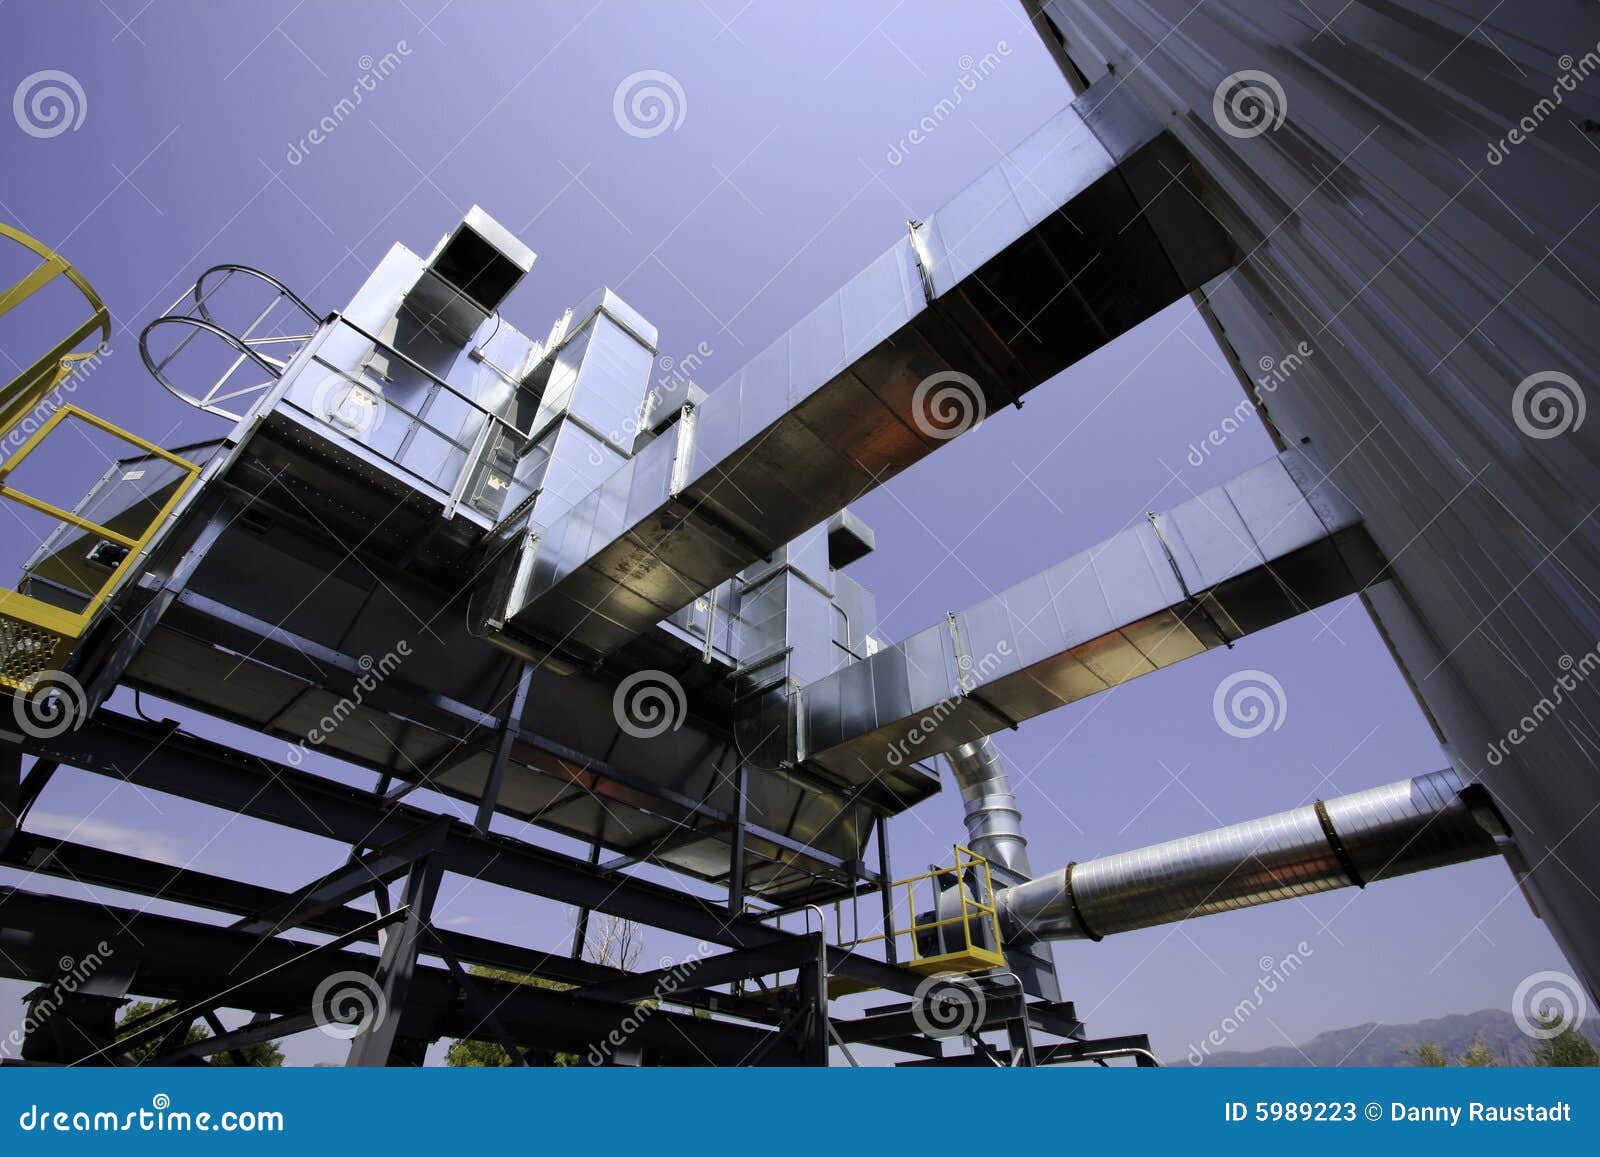 heavy construction dust collector